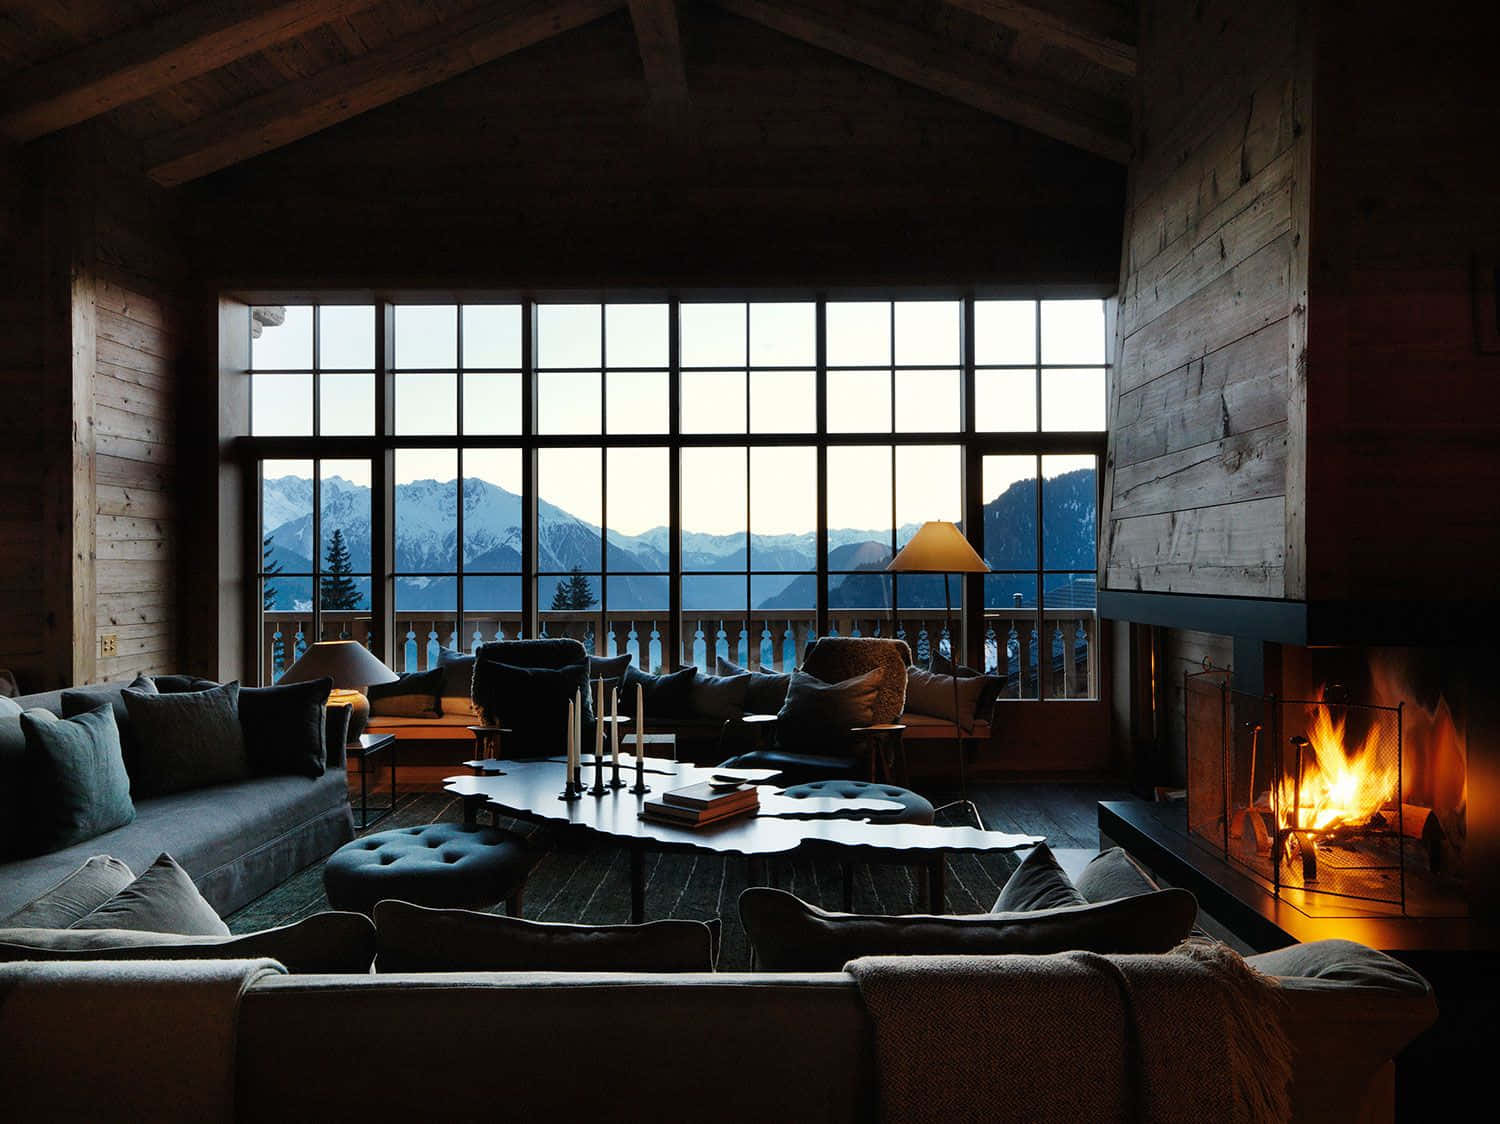 Warm and cozy fireplace in a rustic cabin Wallpaper